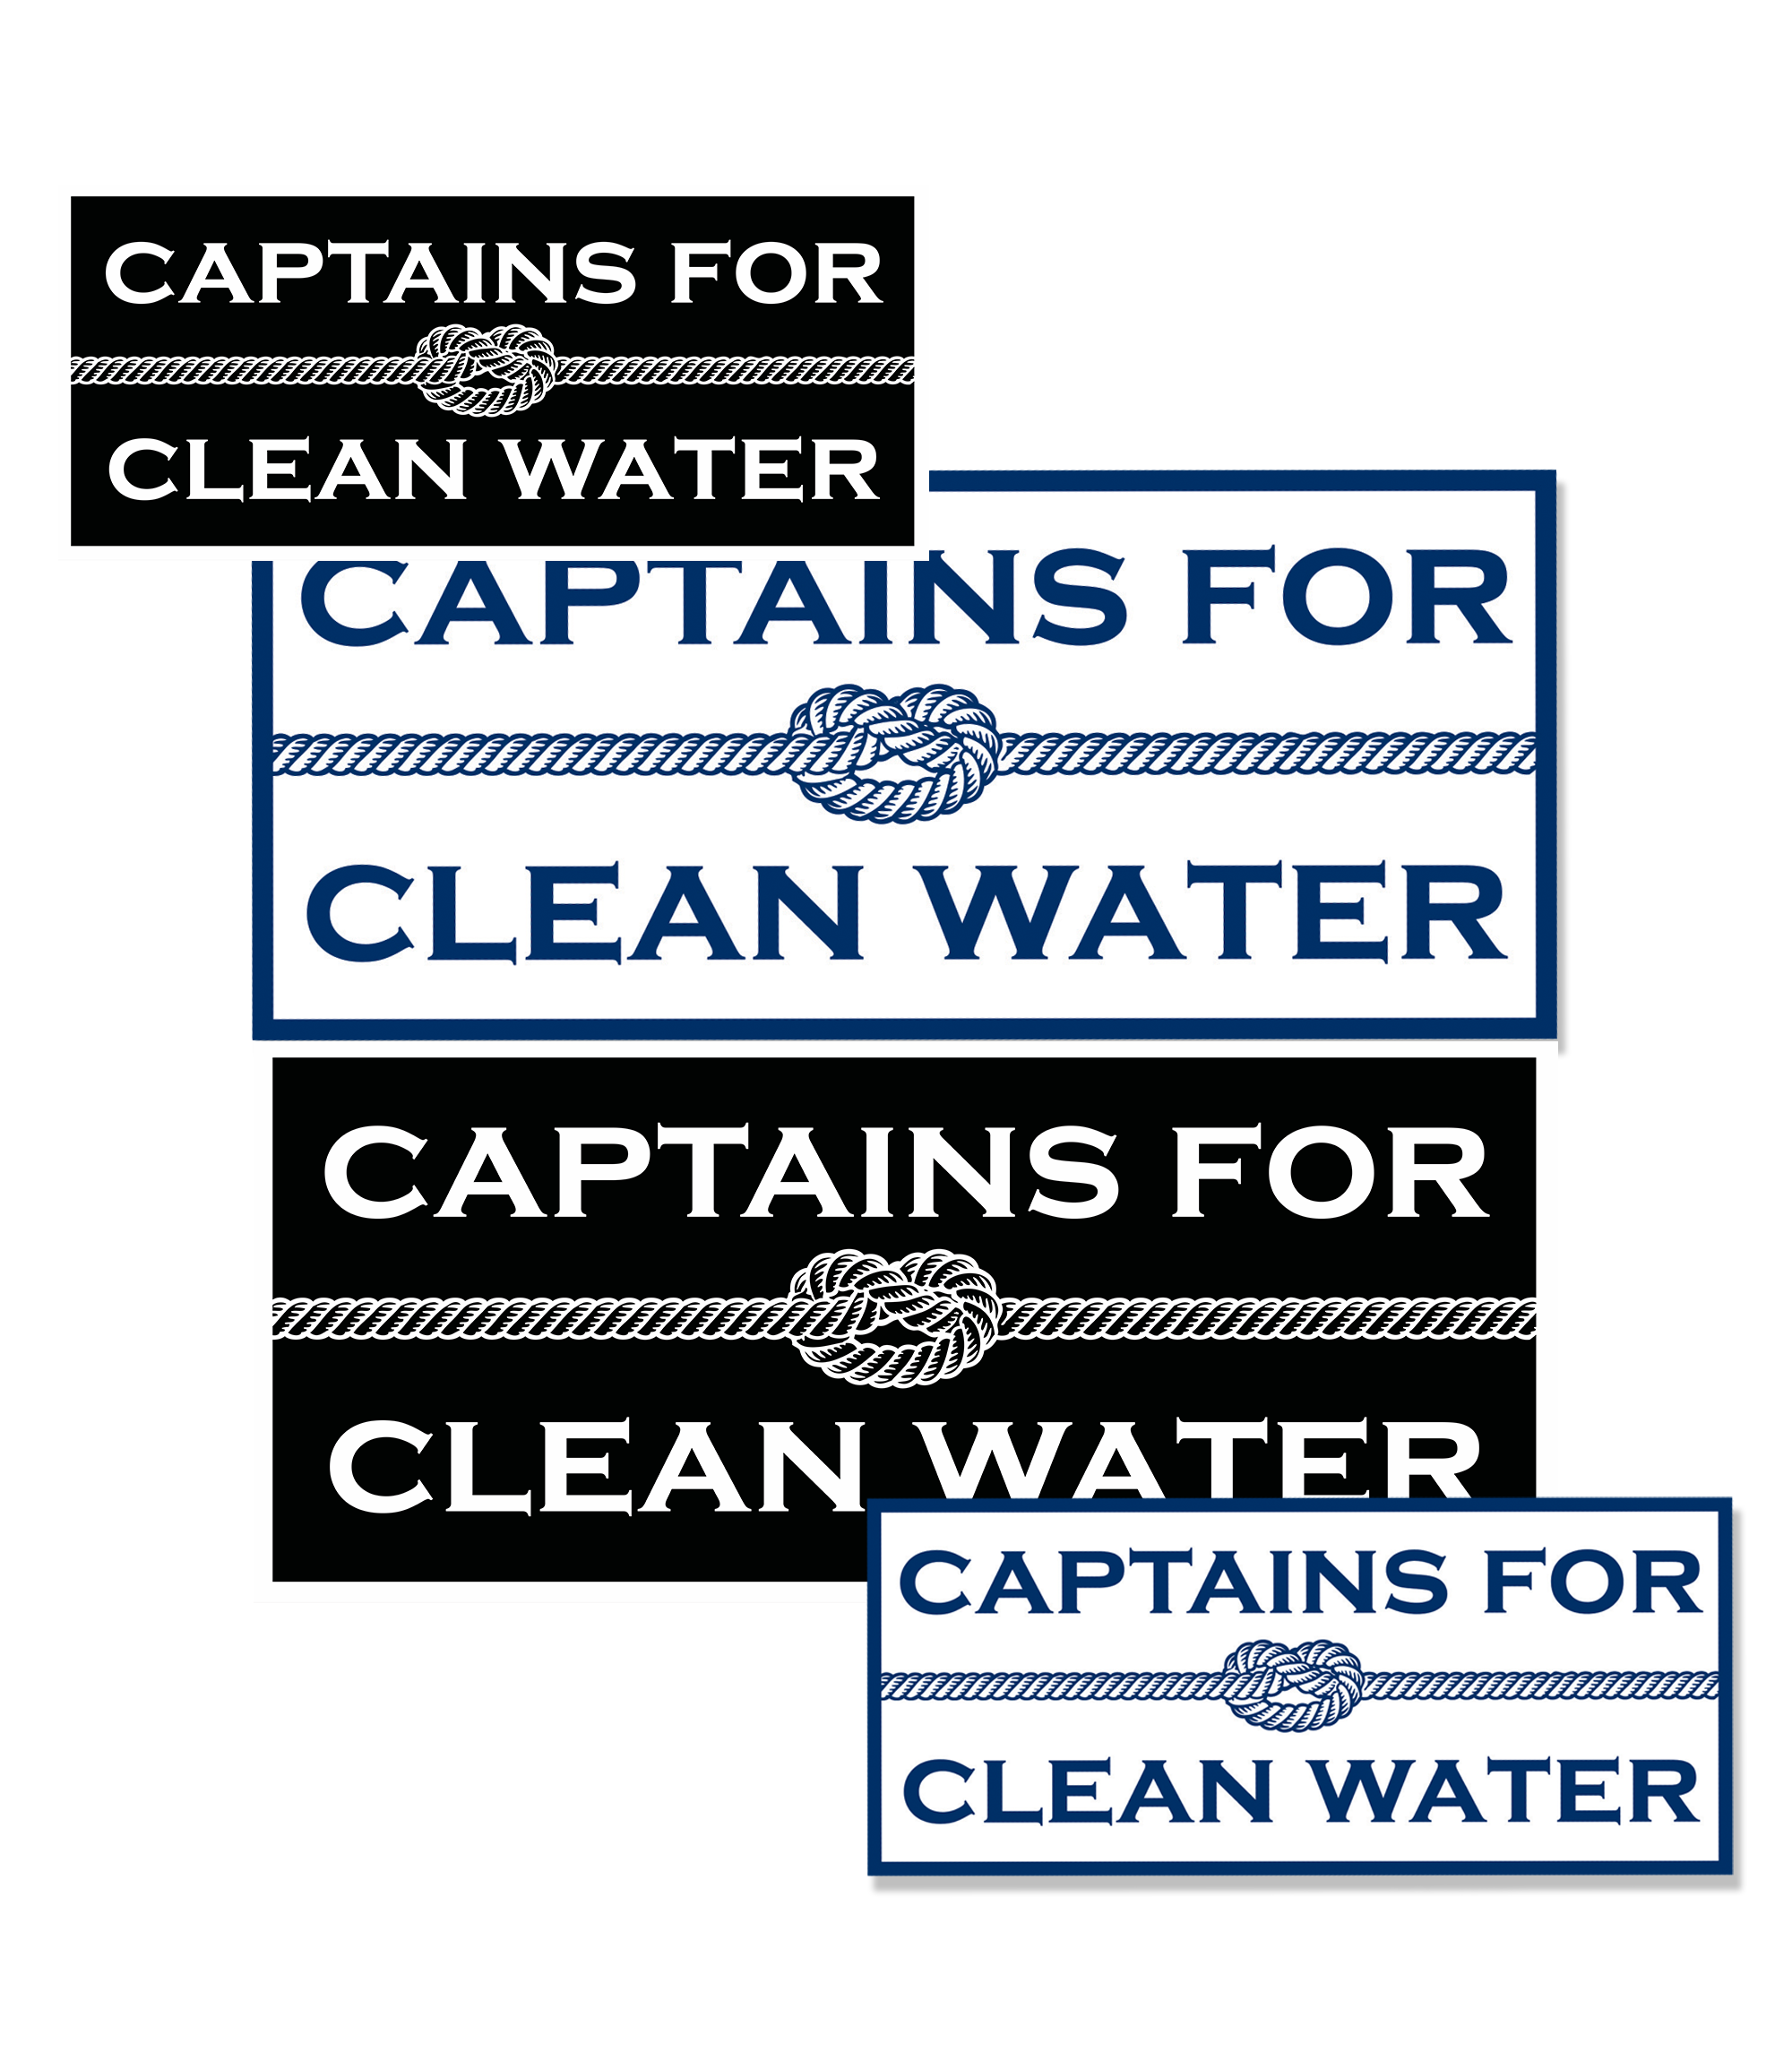 https://captainsforcleanwater.org/wp-content/uploads/2020/07/StickerPacknew.png